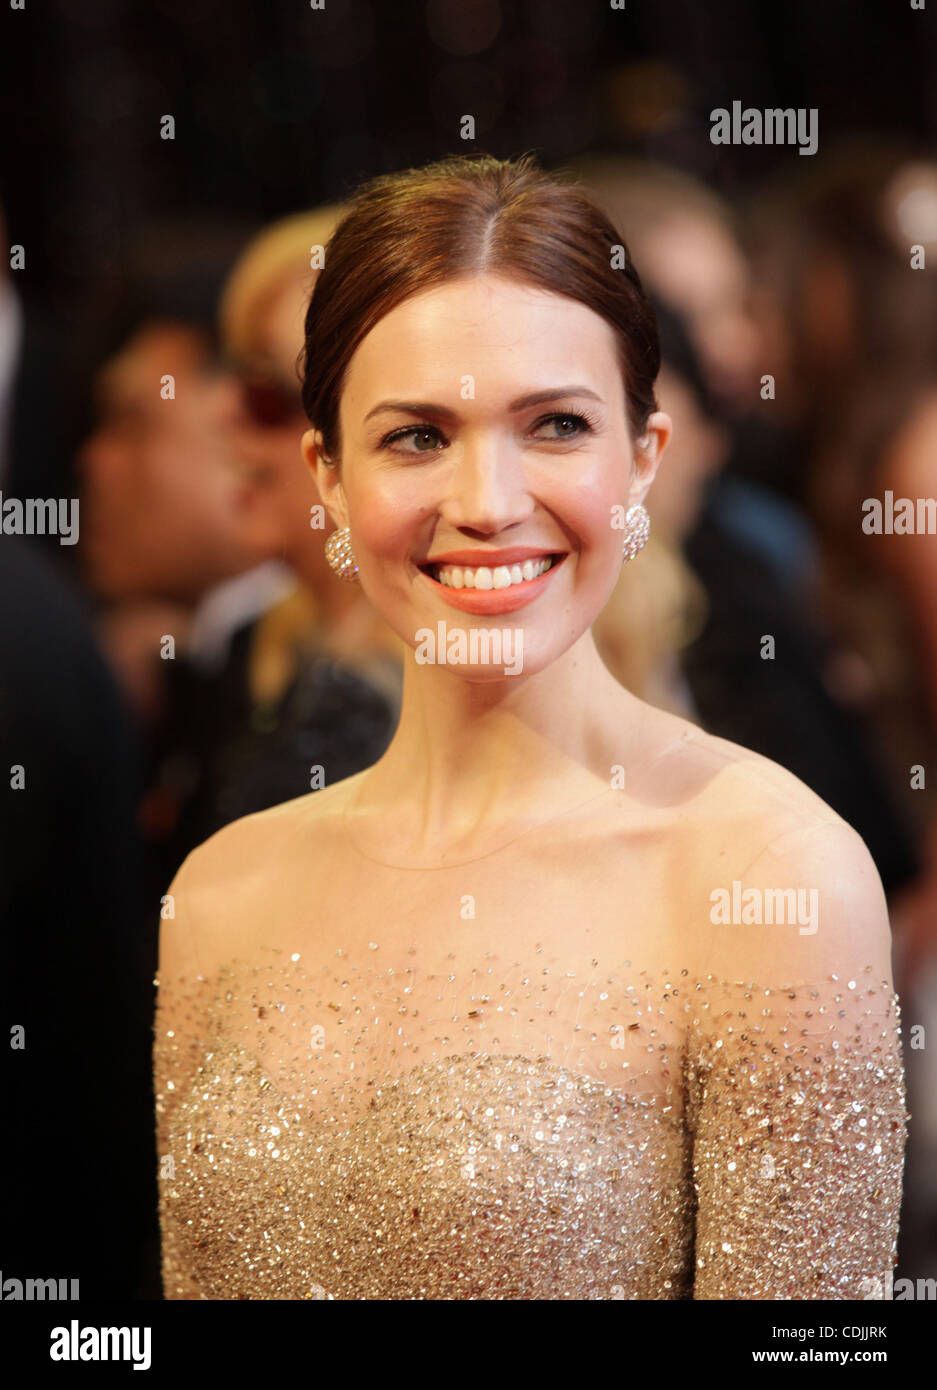 Feb. 27, 2011 - Hollywood, California, U.S. - Actress/singer MANDY MOORE wearing Monique Lhuillier dress, Chopard jewelry, Jimmy Choo shoes on the Oscar red carpet at the 83rd Academy Awards, The Oscars, in front of Kodak Theatre. (Credit Image: © Lisa O'Connor/ZUMAPRESS.com) Stock Photo